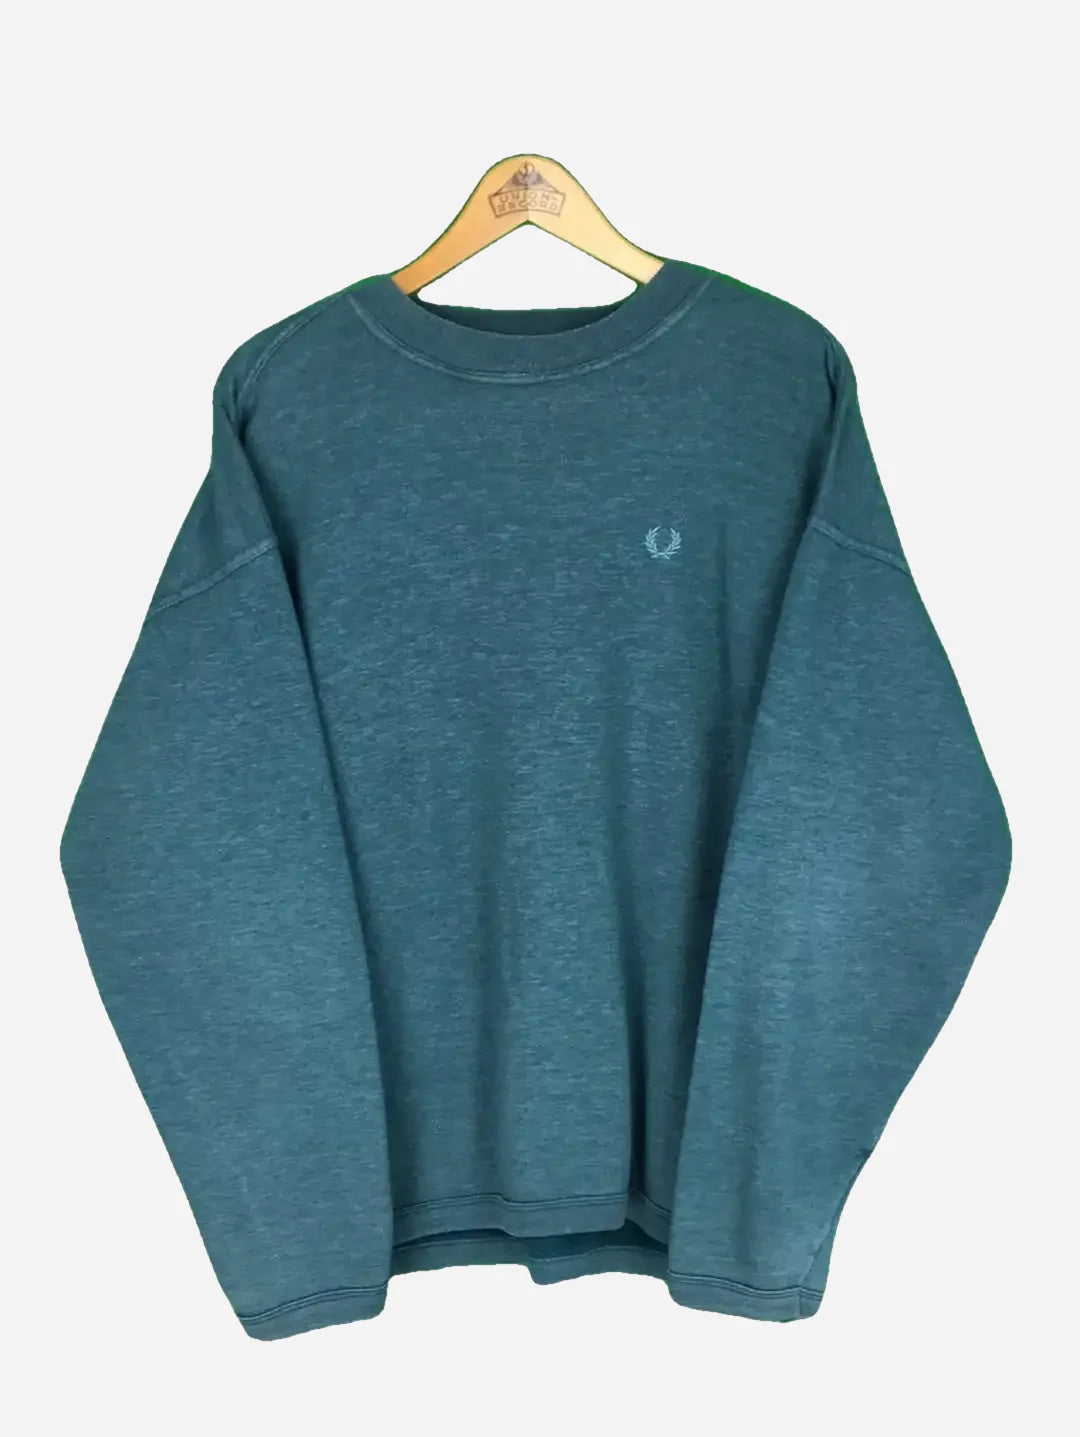 Fred Perry Sweater (L)